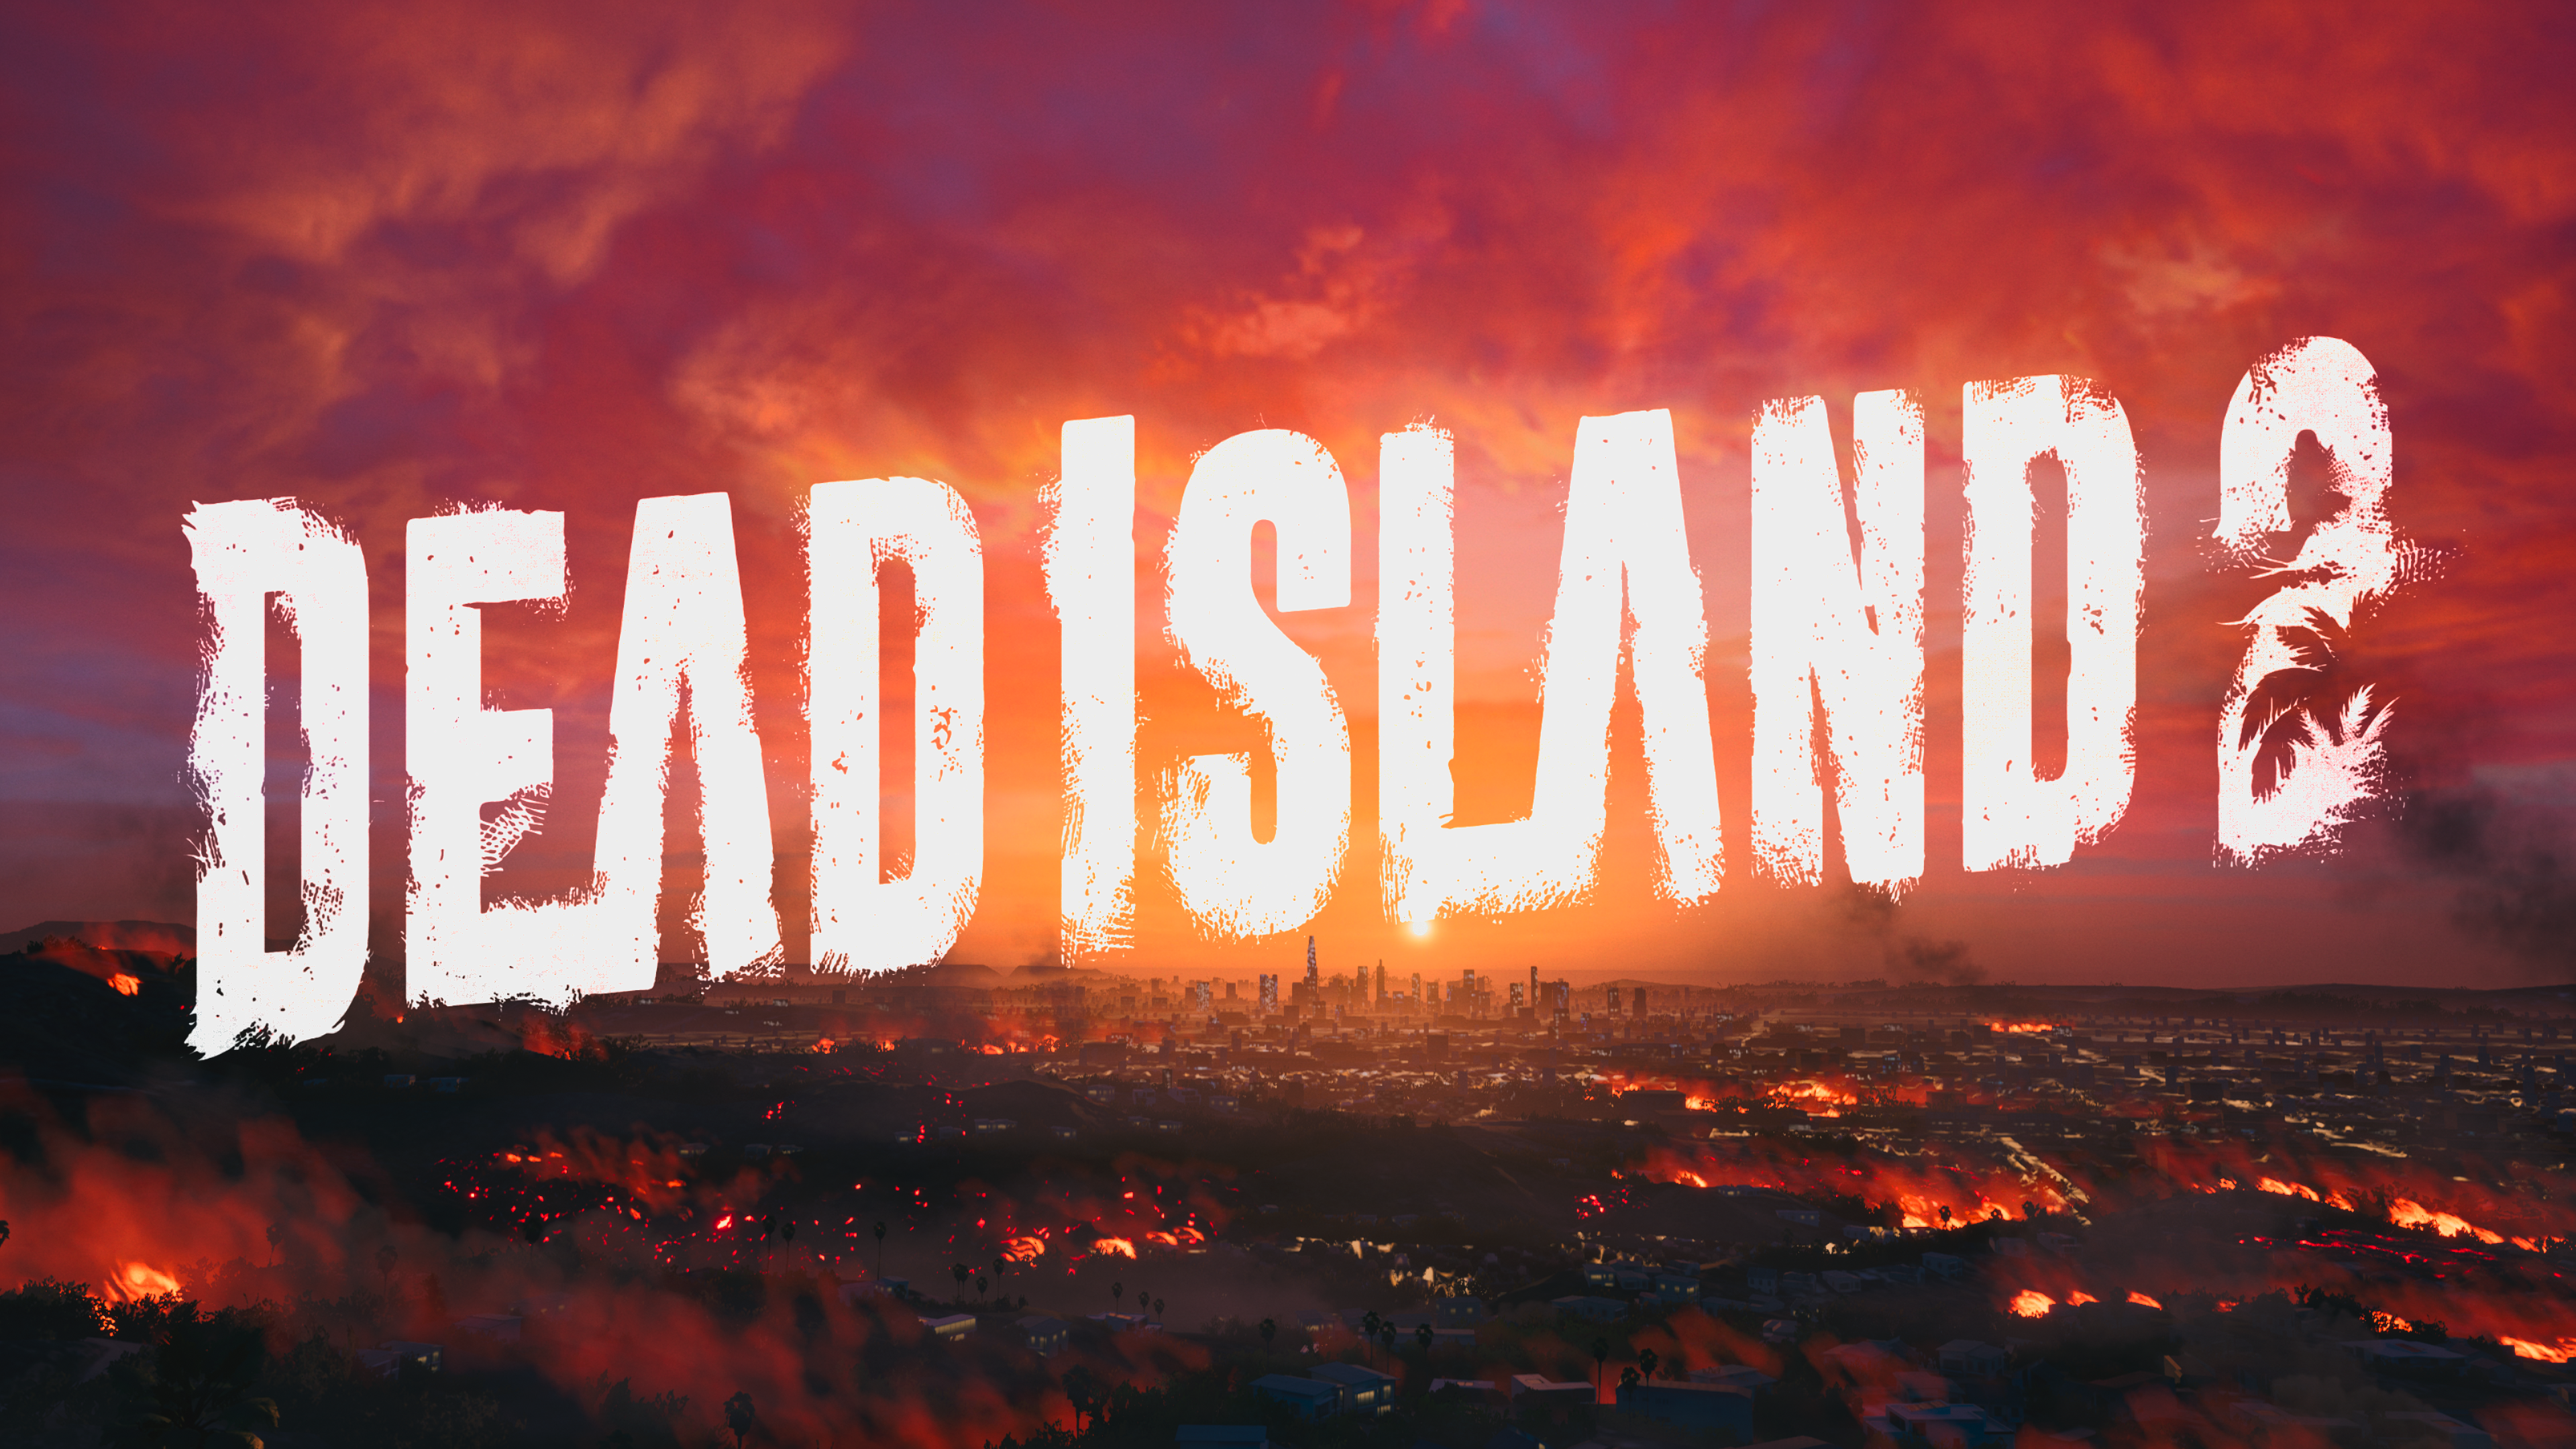 All Update Patch Notes for Dead Island 2: All New Features - News